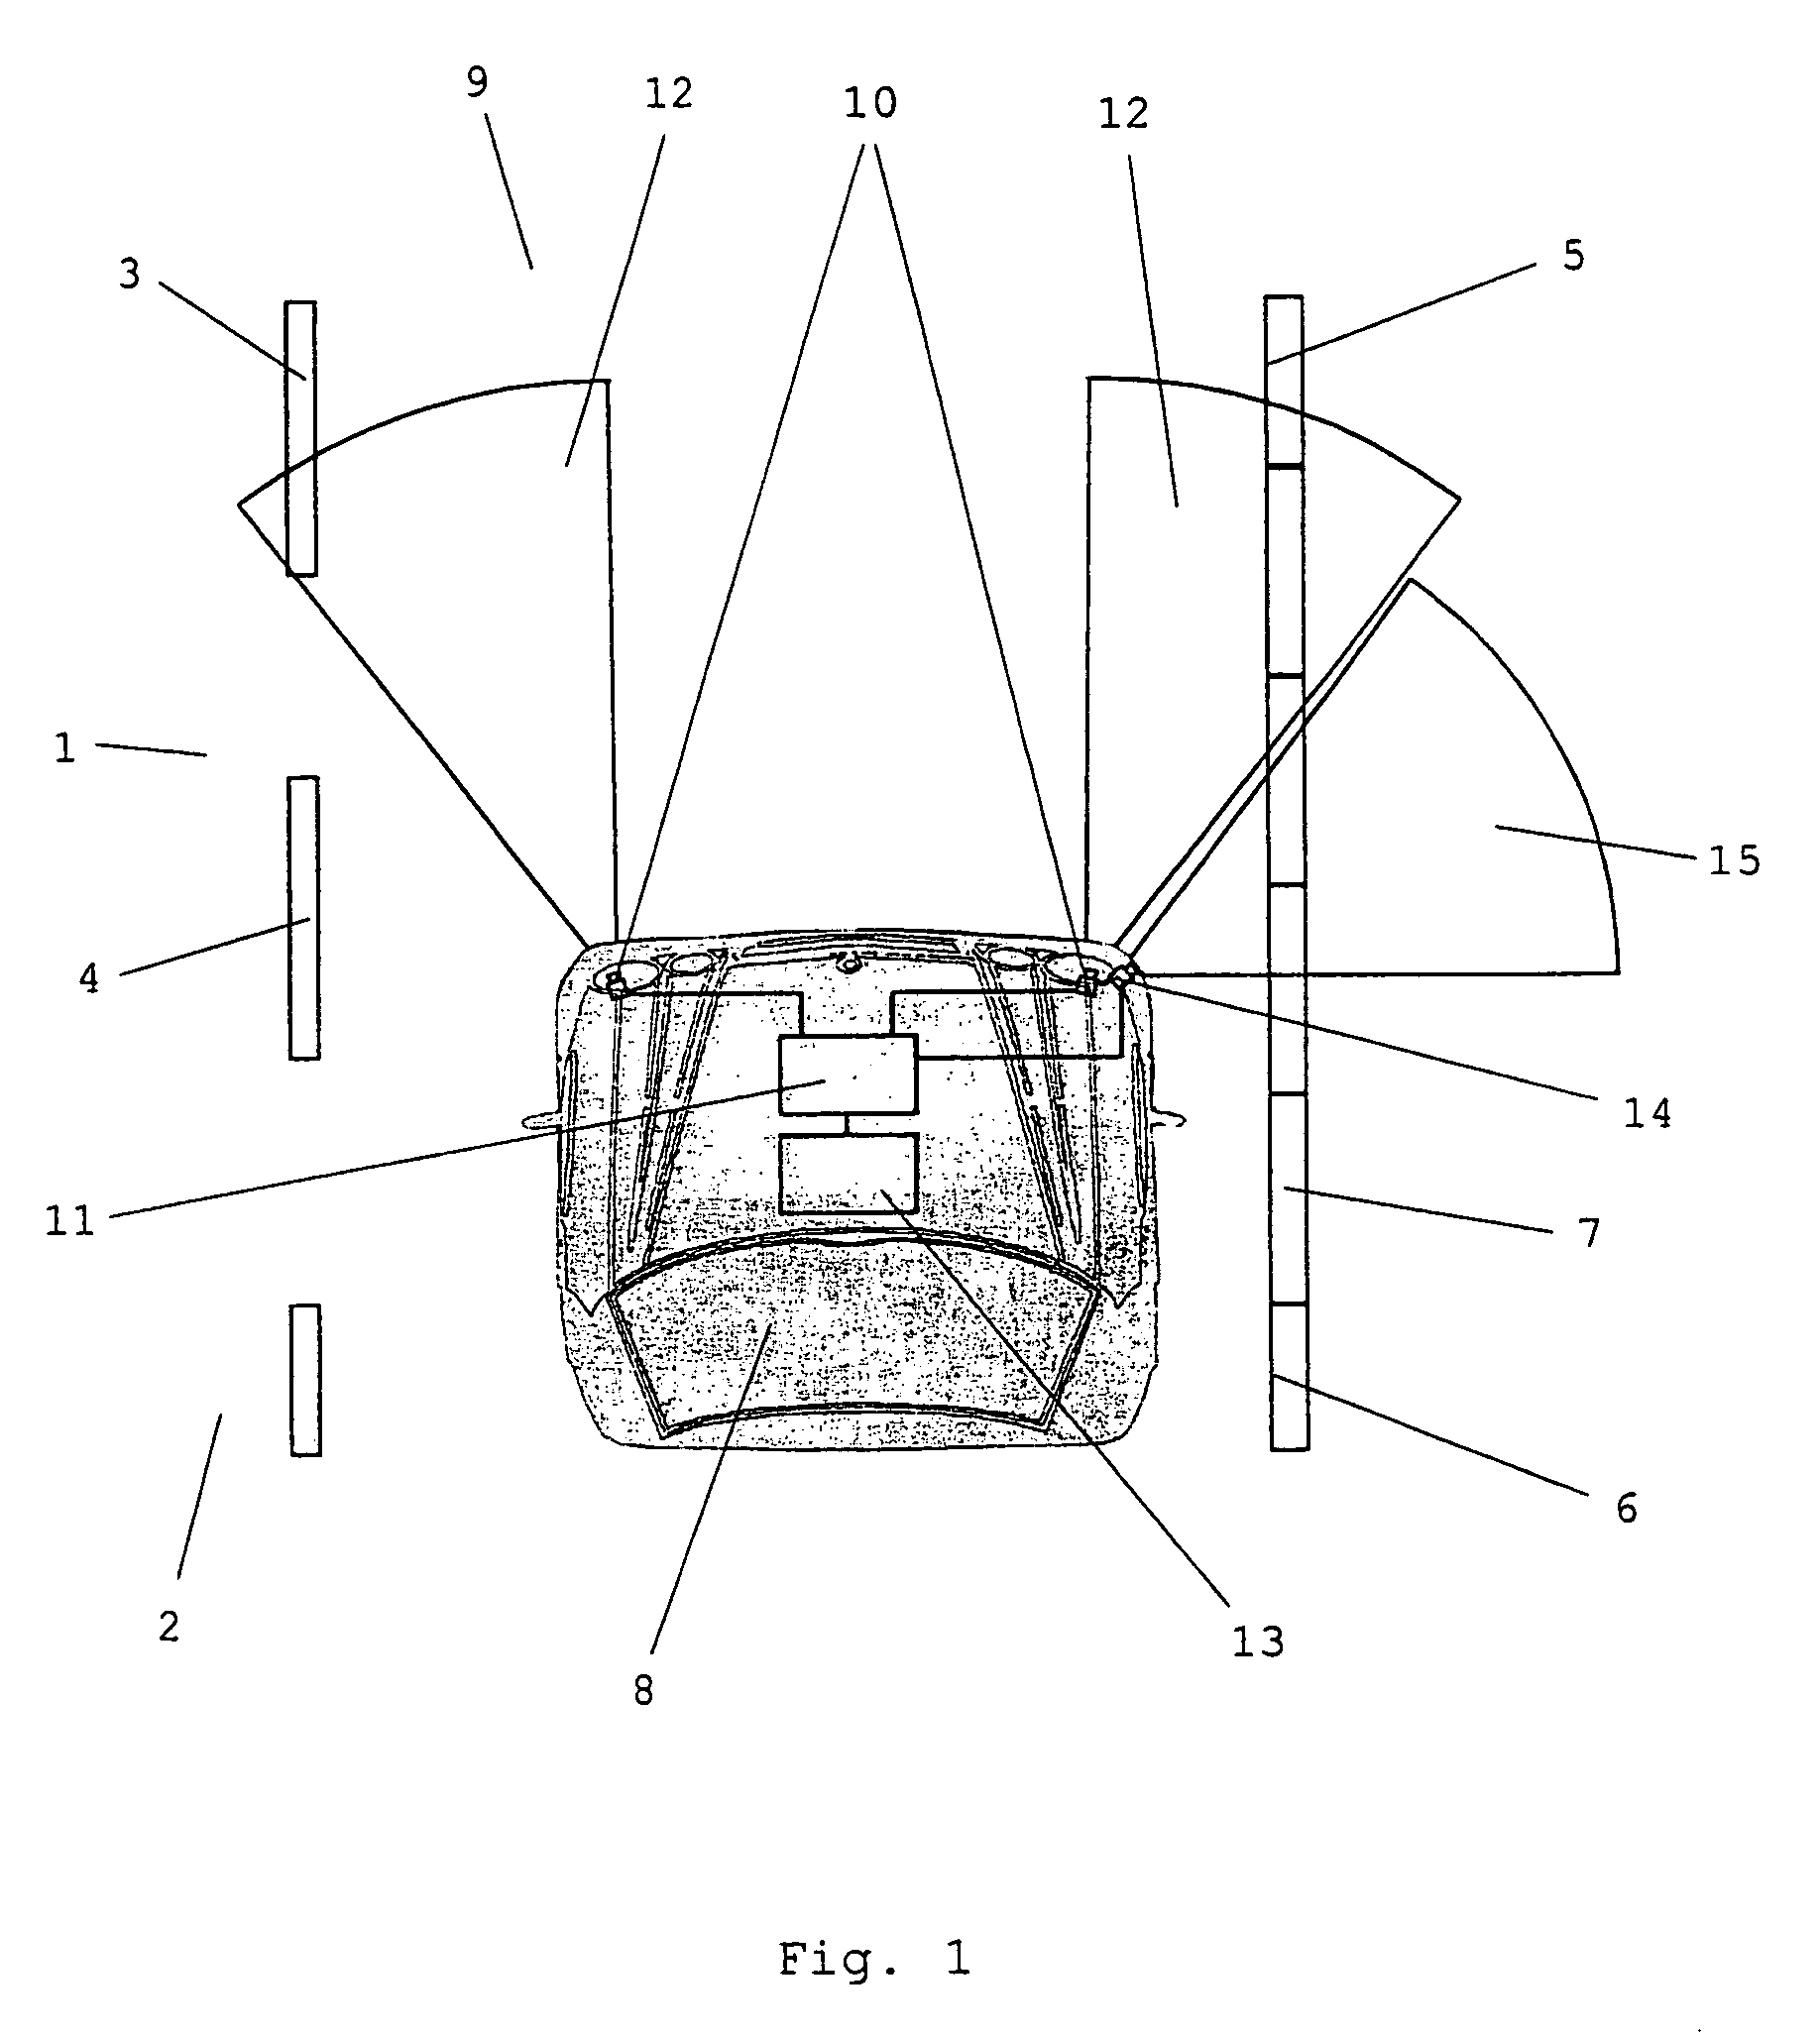 Lane-departure warning system with differentiation between an edge-of-lane marking and a structural boundary of the edge of the lane